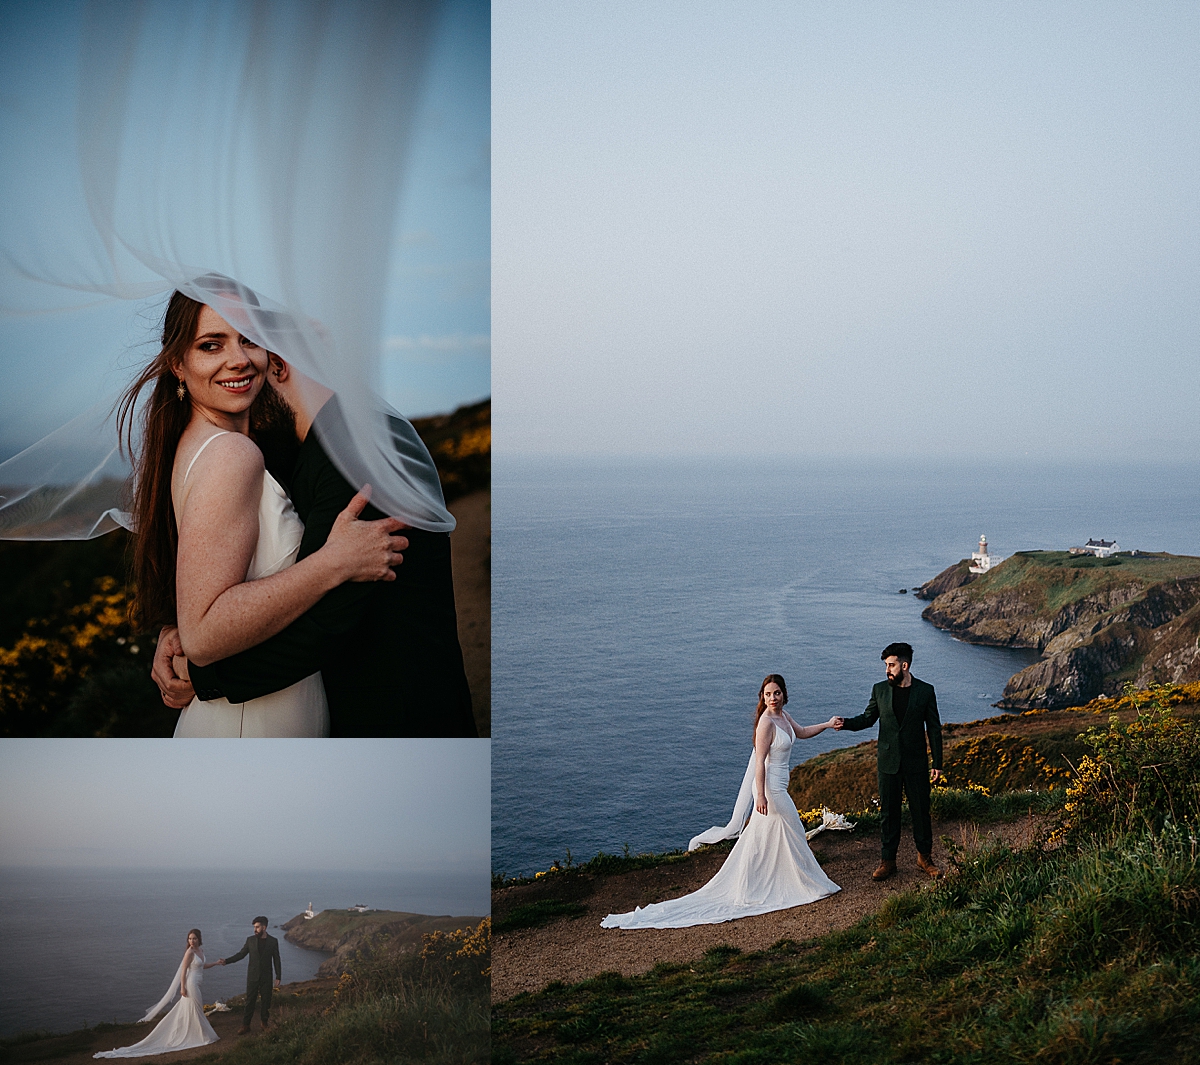 married couple eloping in Ireland with lighthouse in the background at sunrise 